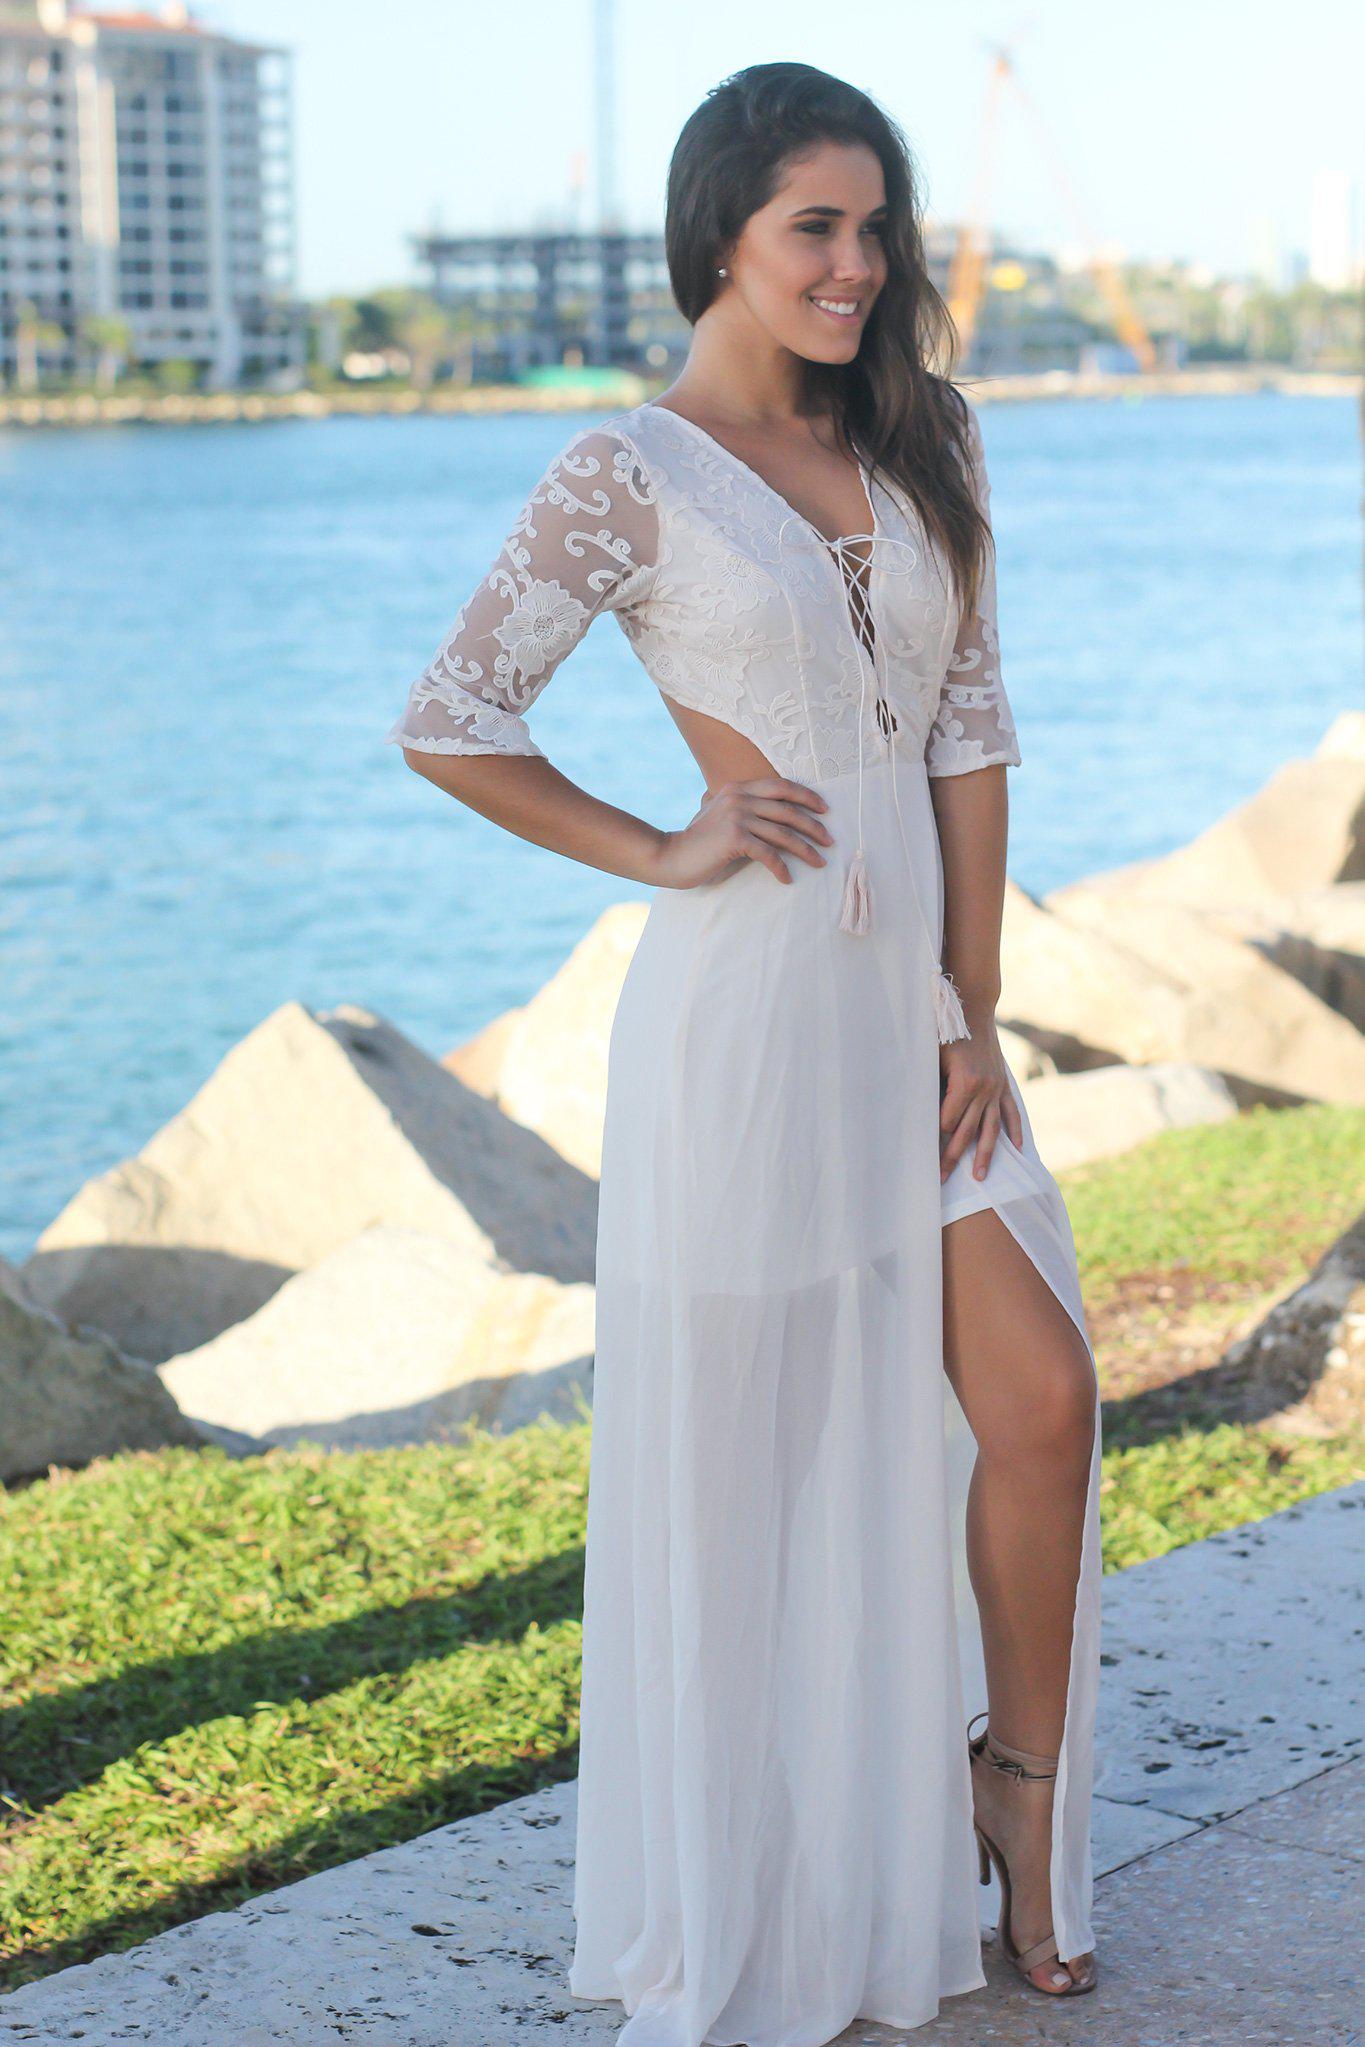 Cream Lace Up Top Maxi Dress with Open Back